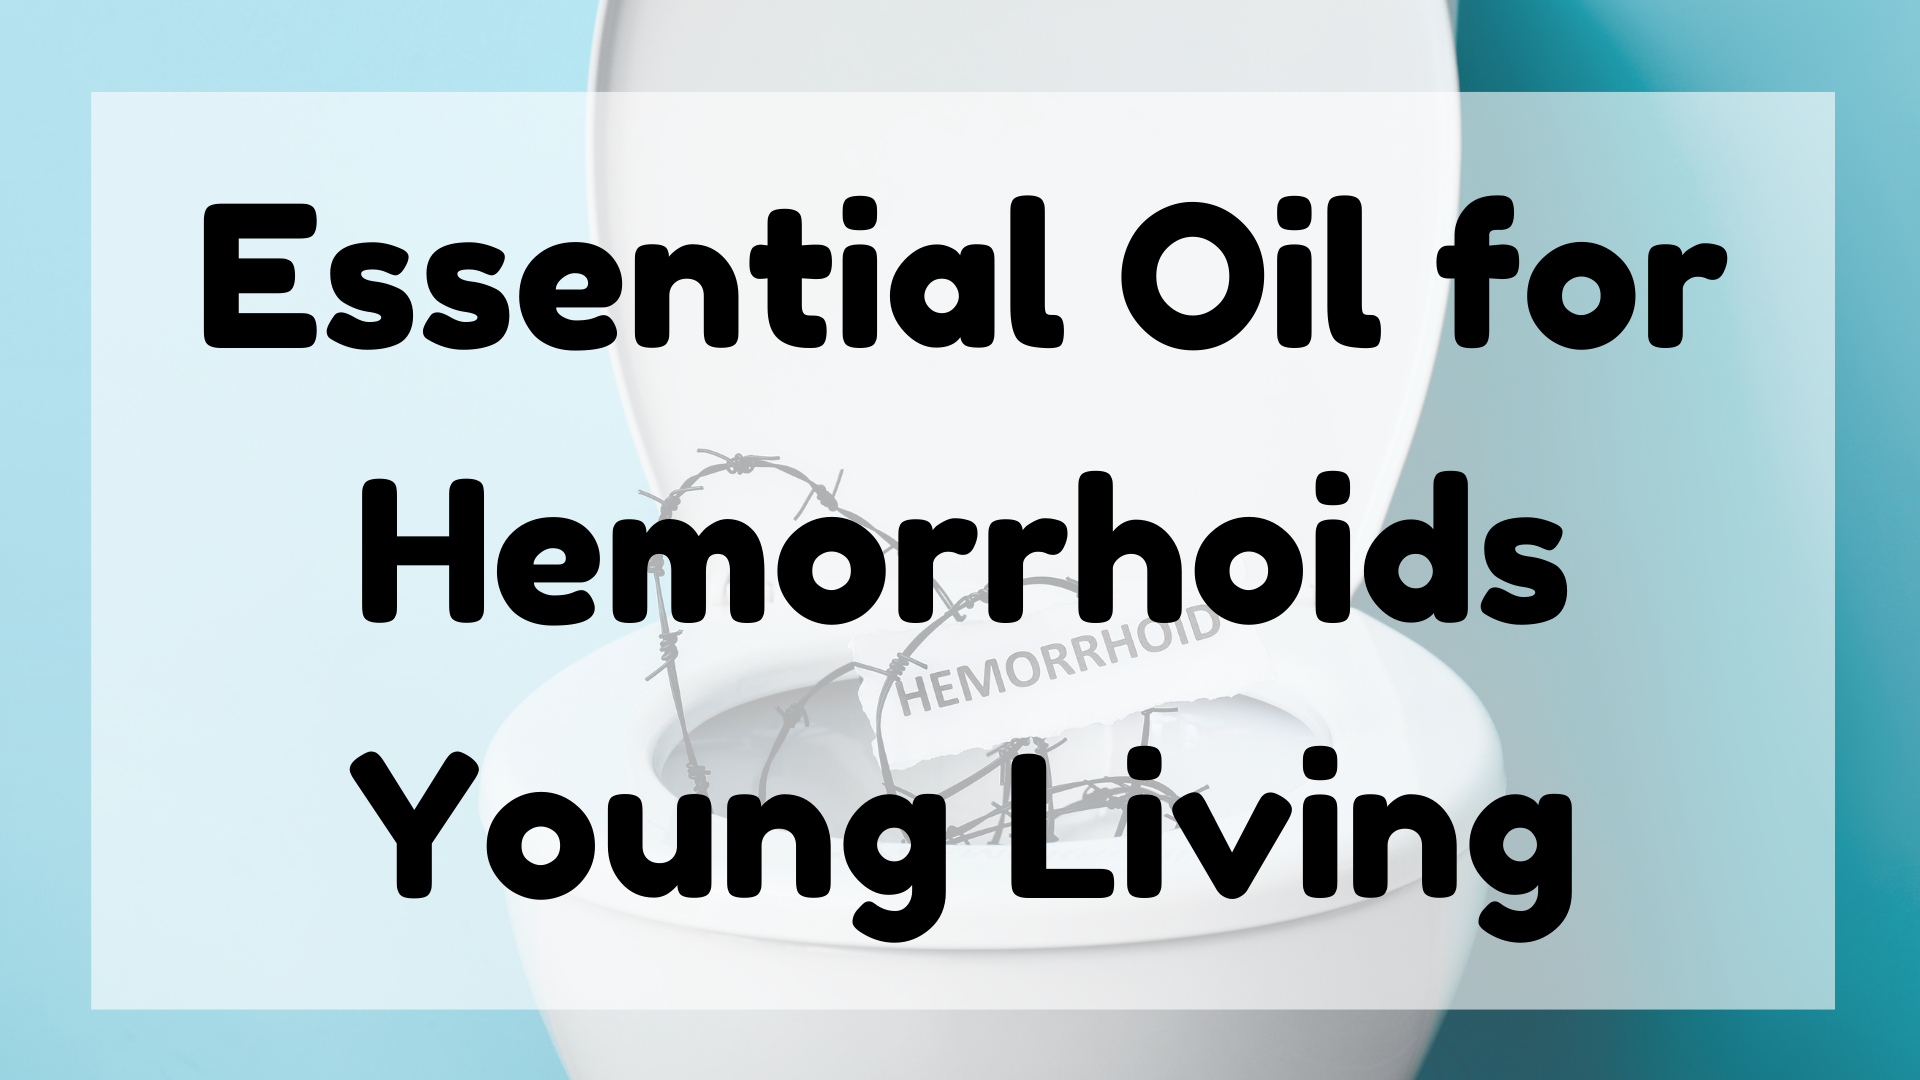 Essential Oil for Hemorrhoids Young Living featured image